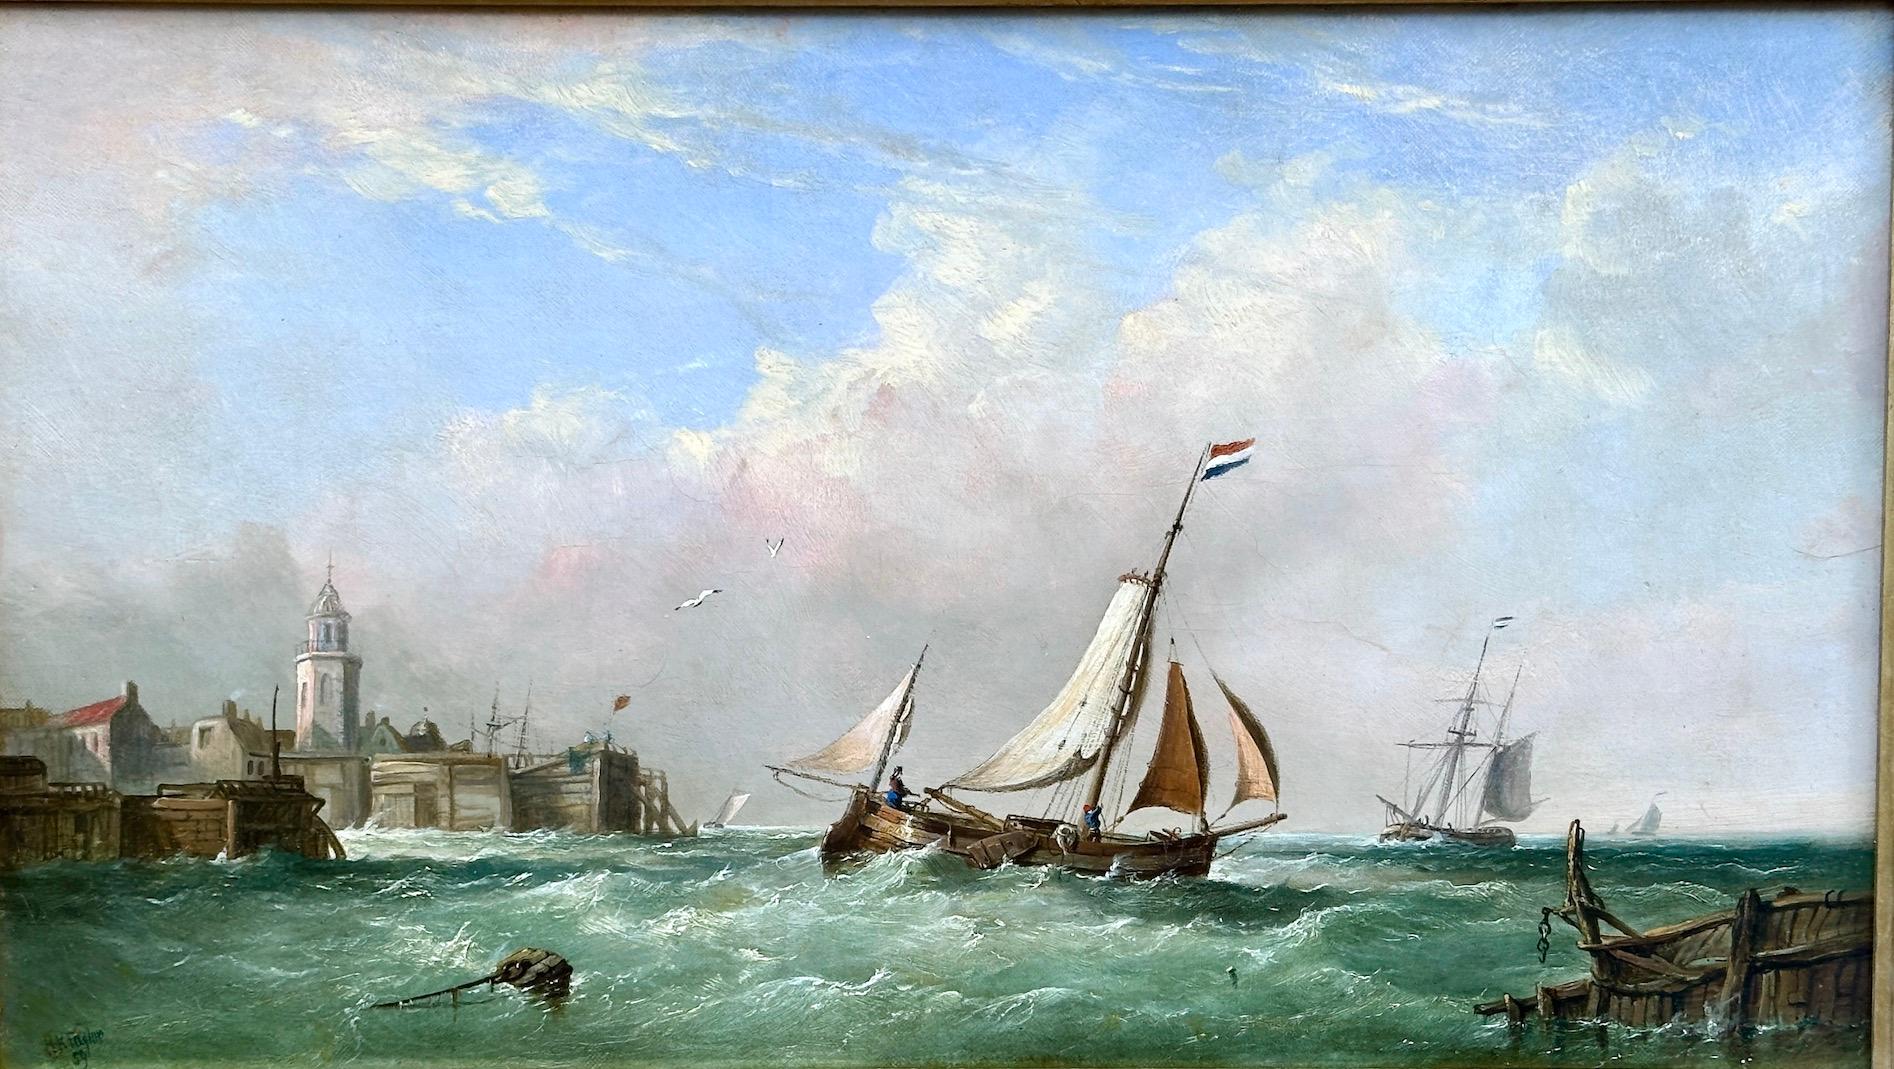 19th century English marine Sailing scene of Dutch fishing boats by a harbor  - Painting by Henry King Taylor